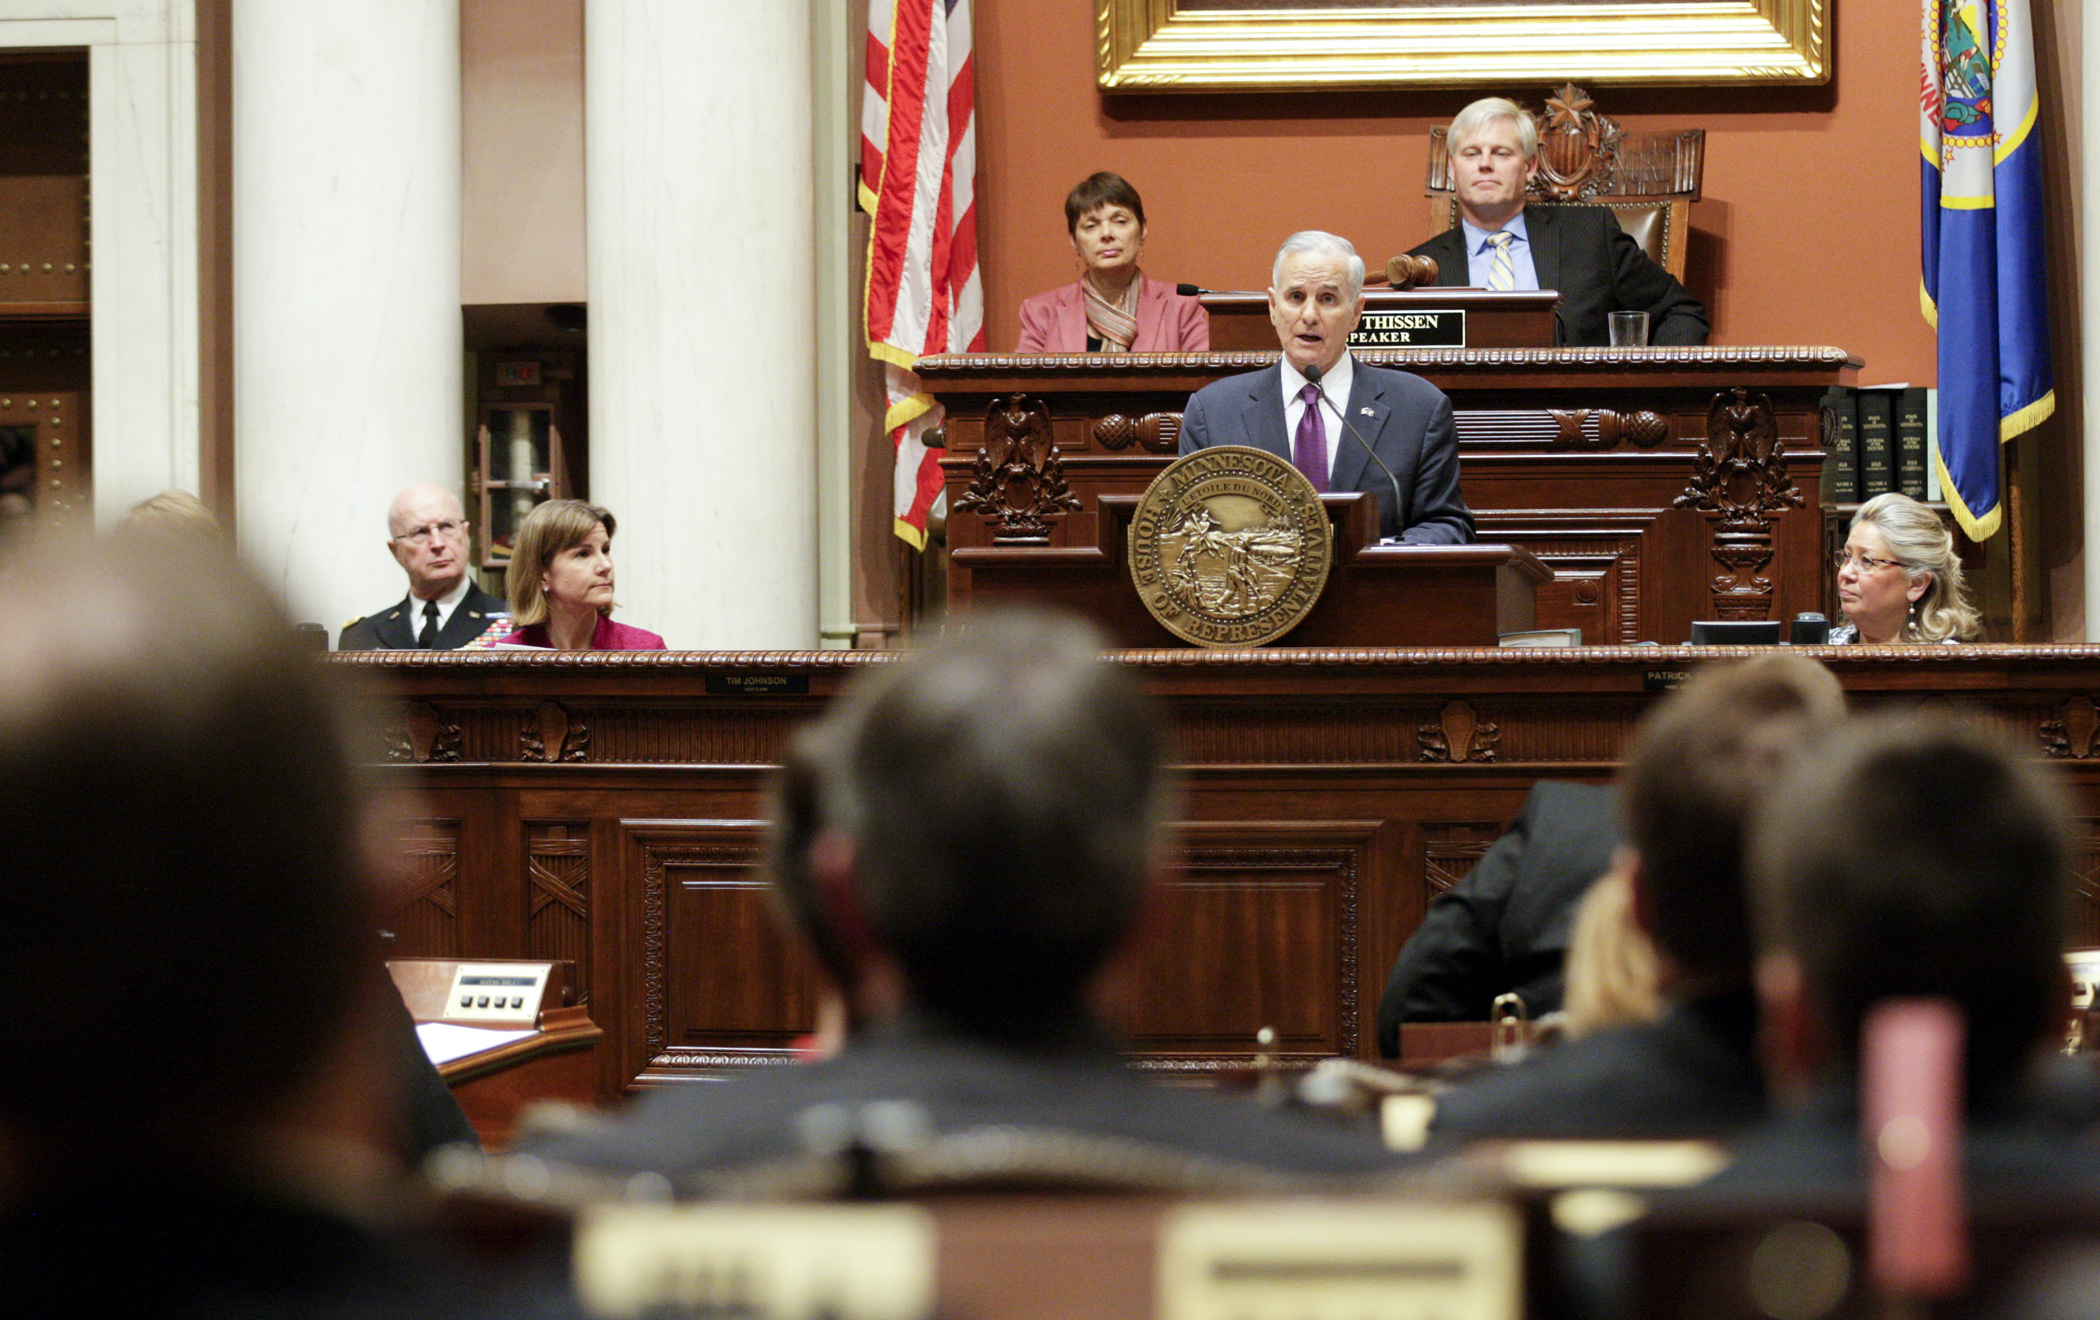 Gov. Mark Dayton delivers his State of the State address to a joint session of the Legislature in the House Chamber April 30. Photo by Paul Battaglia